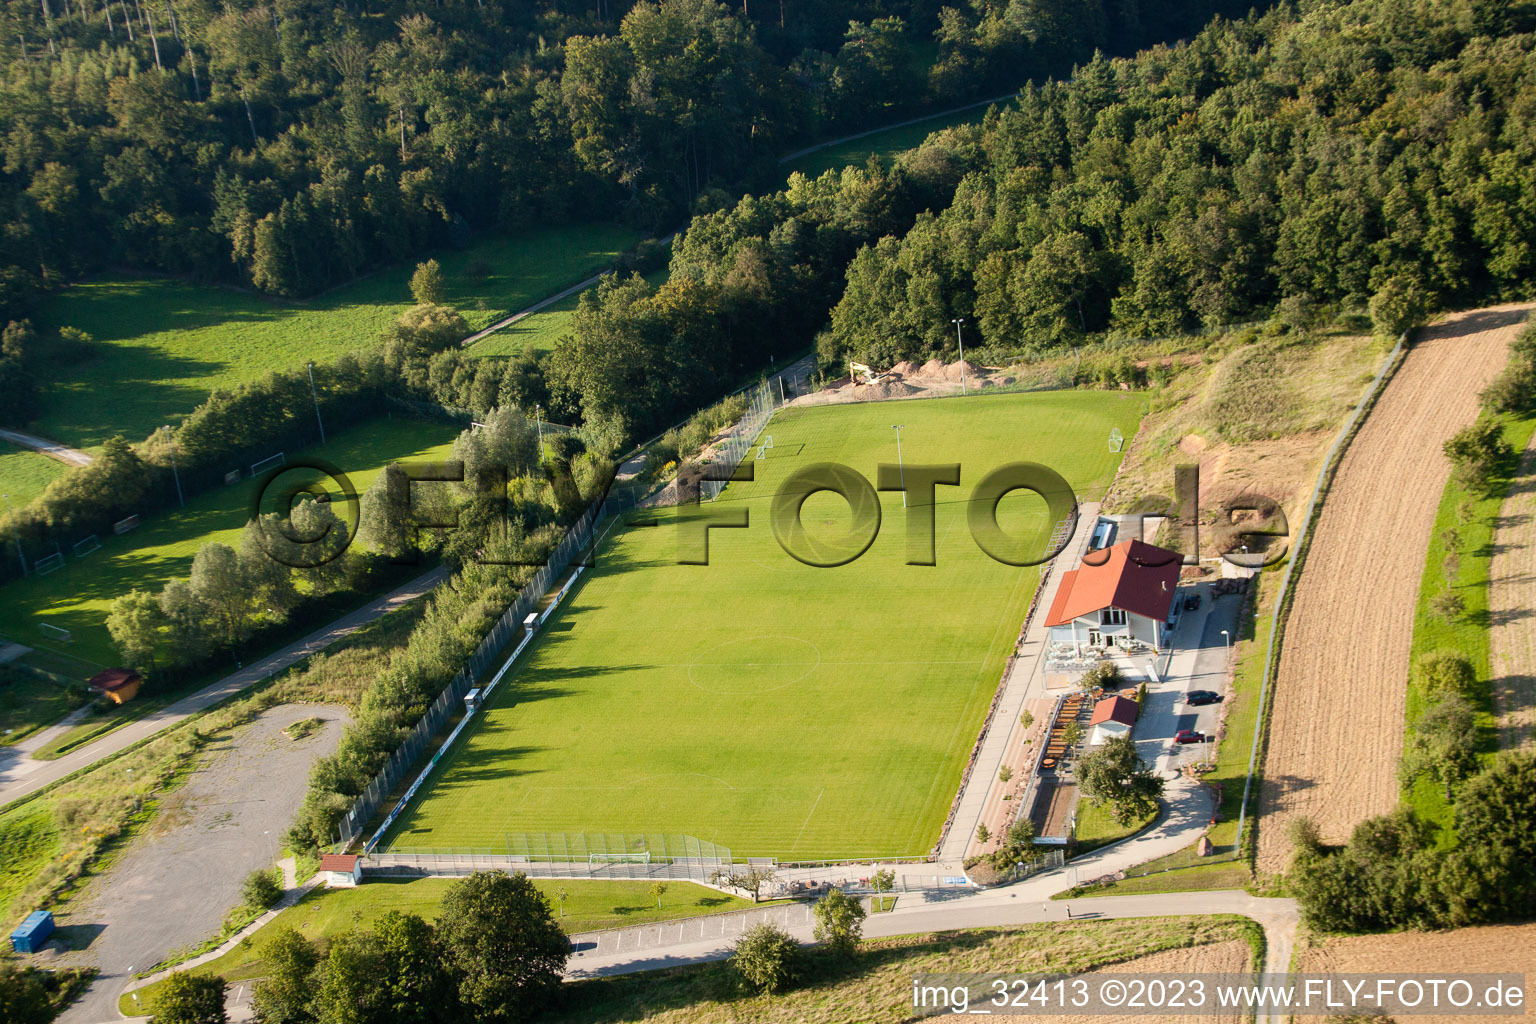 Drone image of Pneuhage Stadium in the district Auerbach in Karlsbad in the state Baden-Wuerttemberg, Germany